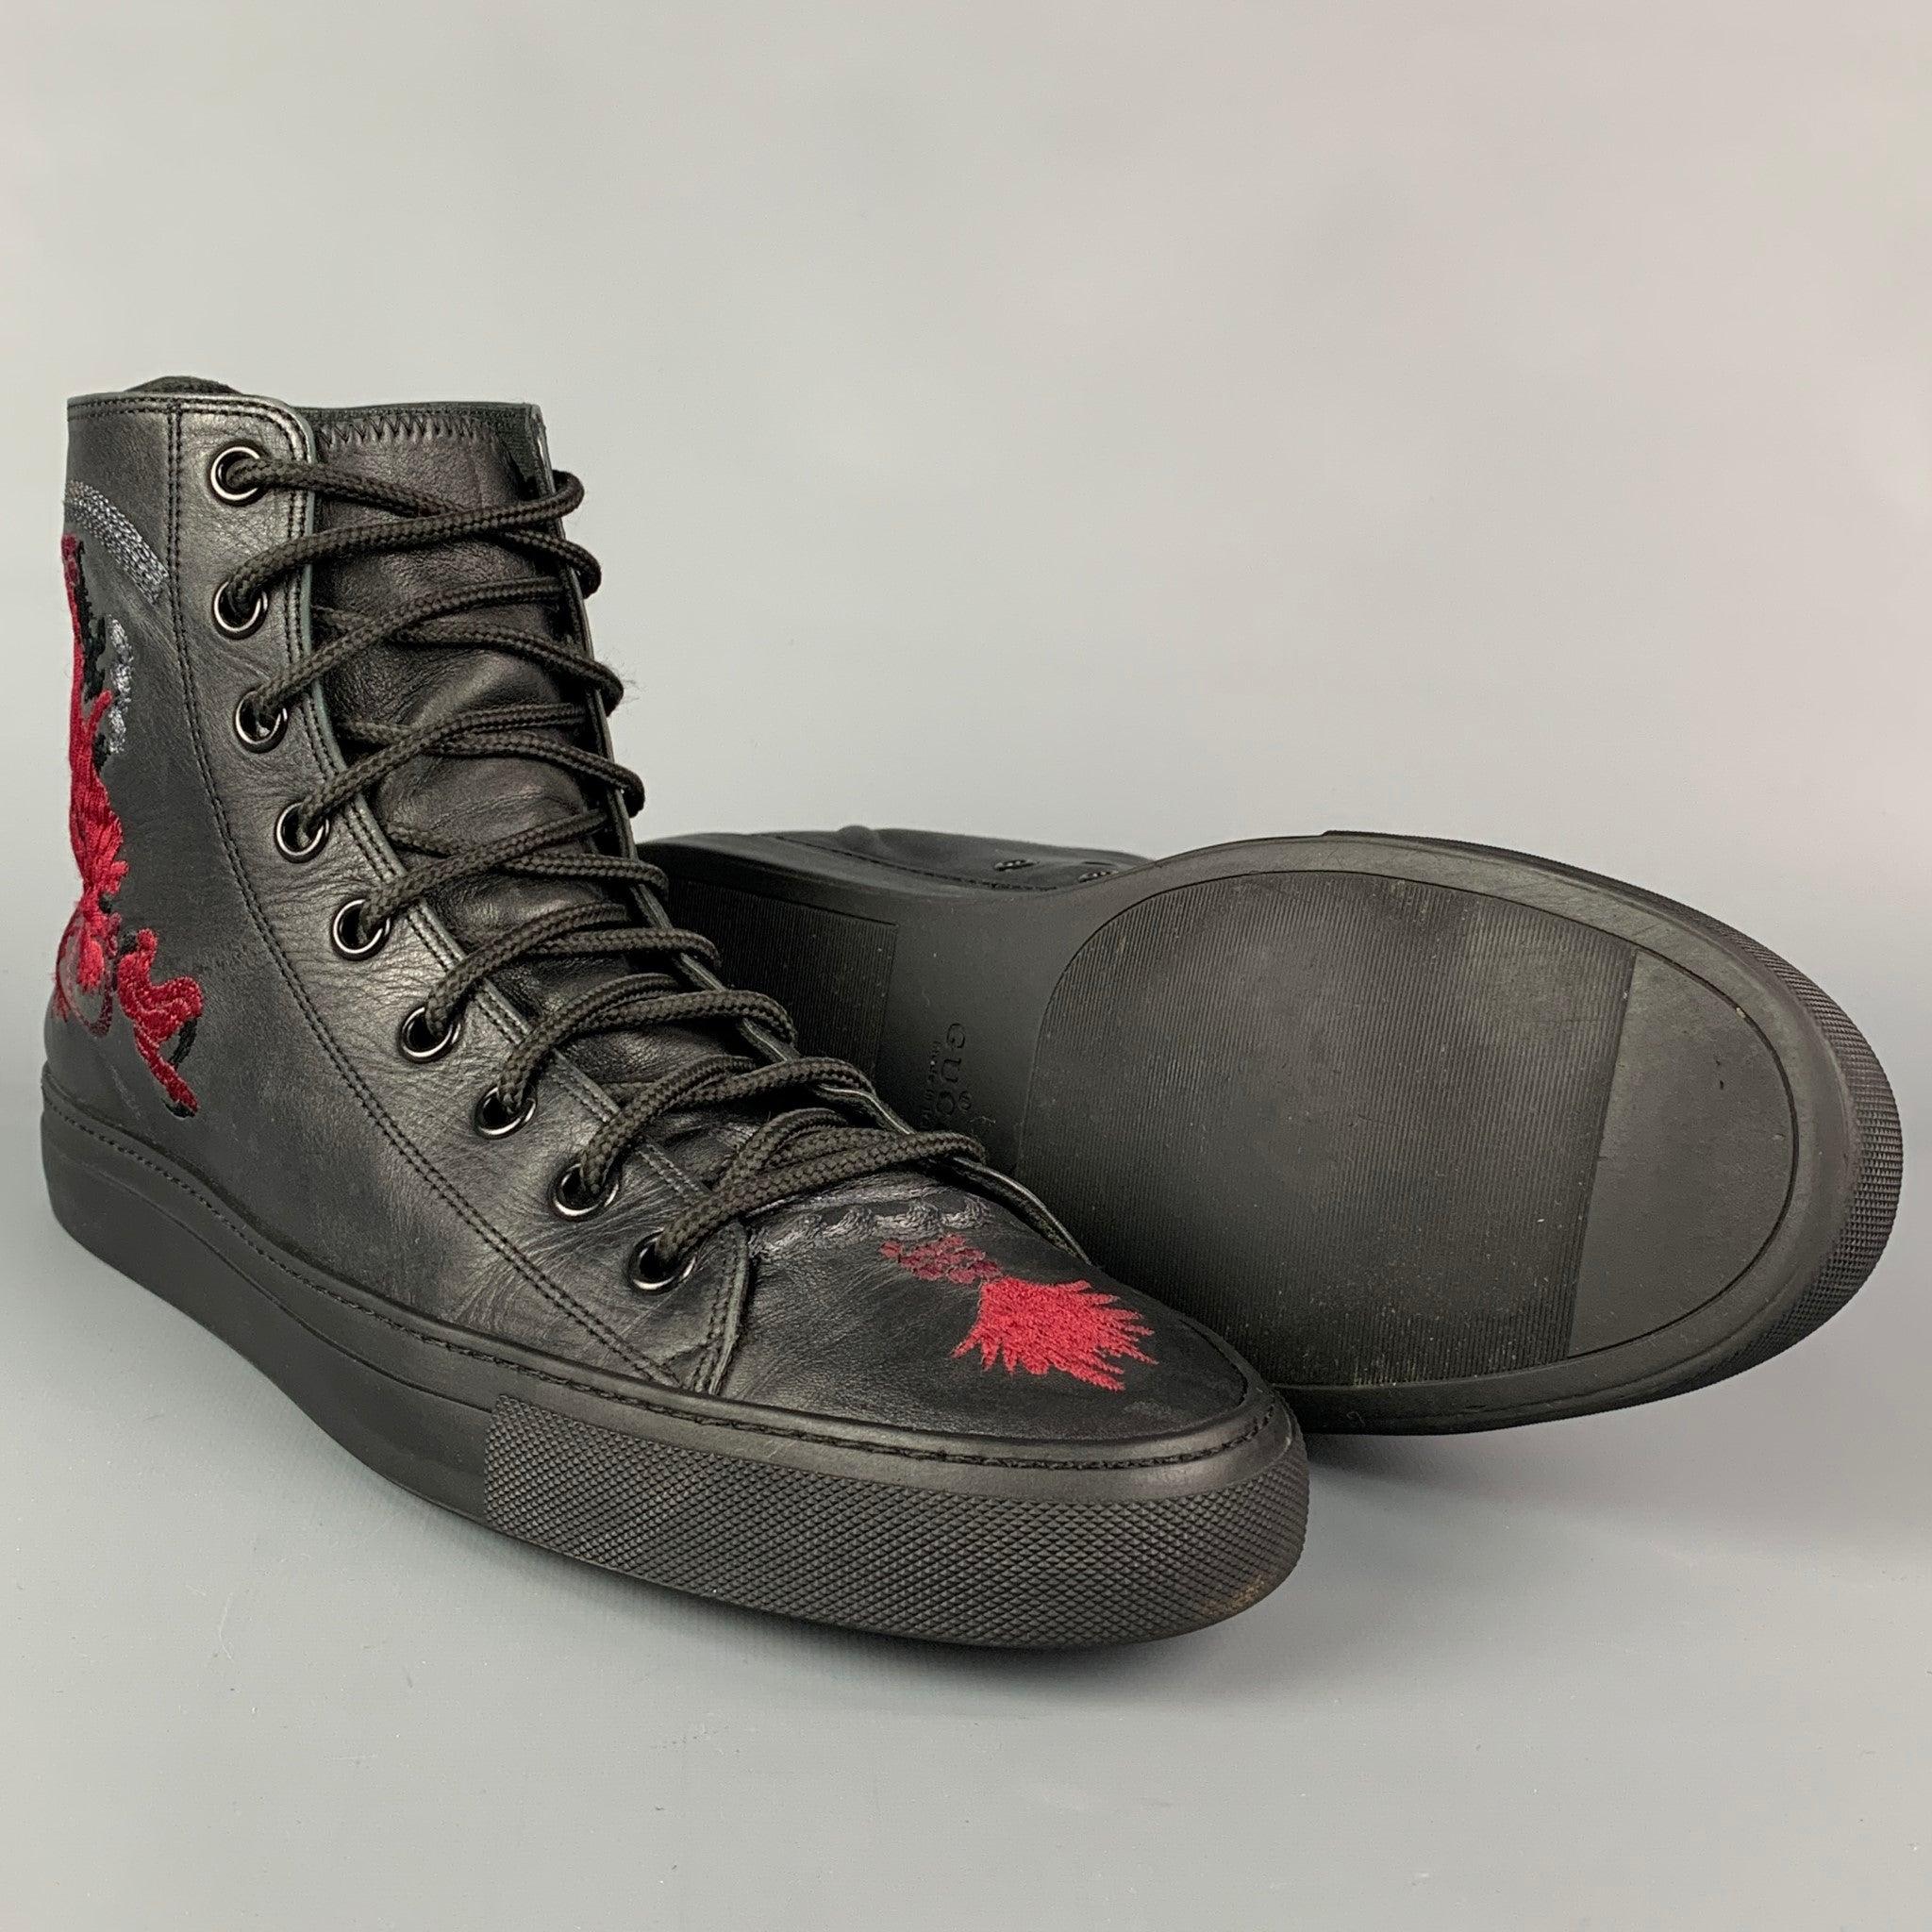 GUCCI by TOM FORD SS 2001 Size 12 Black Dragon Print Leather High Top Sneakers In Good Condition For Sale In San Francisco, CA